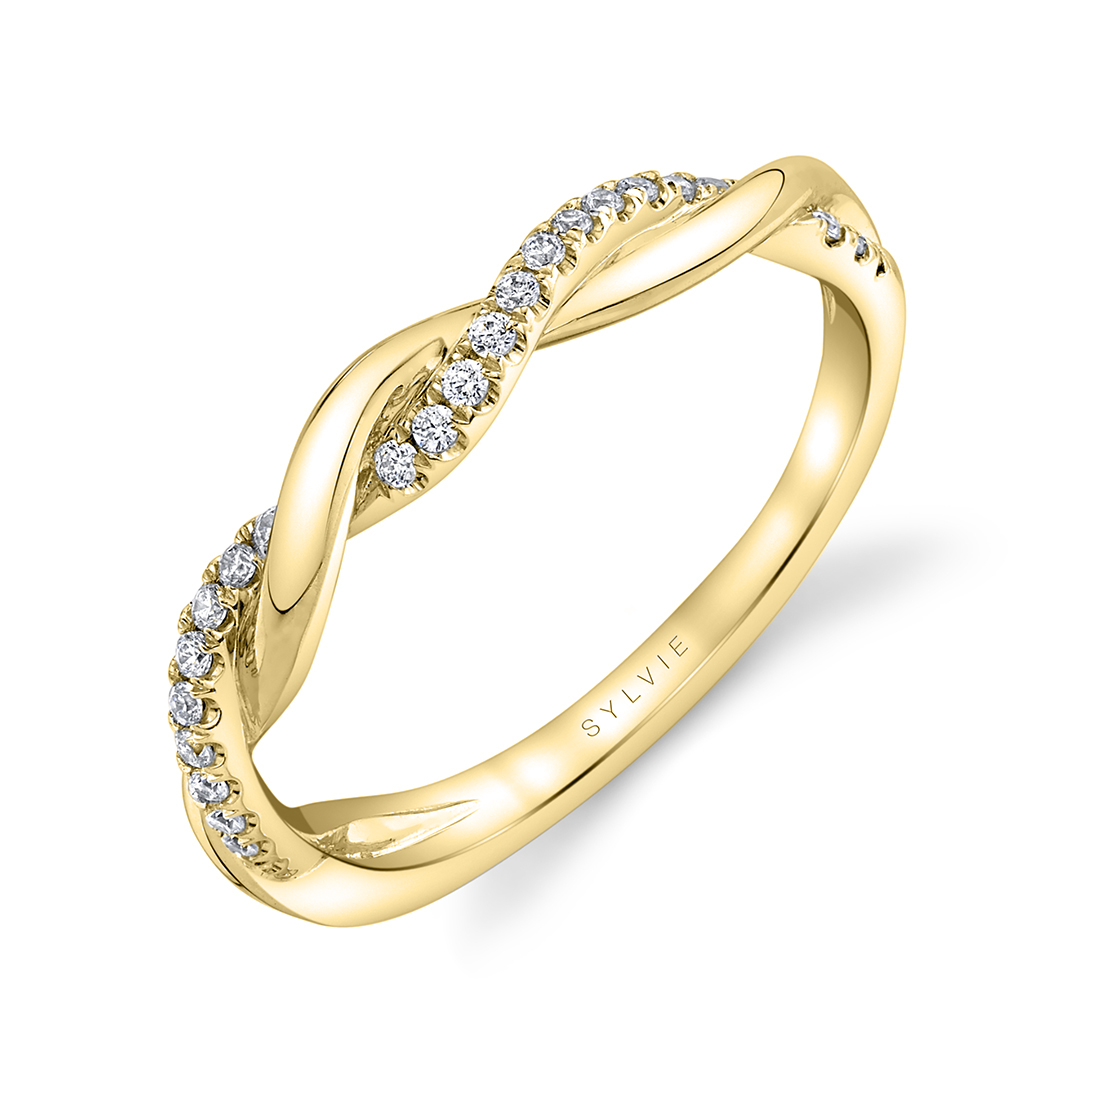 Spiral Wedding Band in Yellow Gold